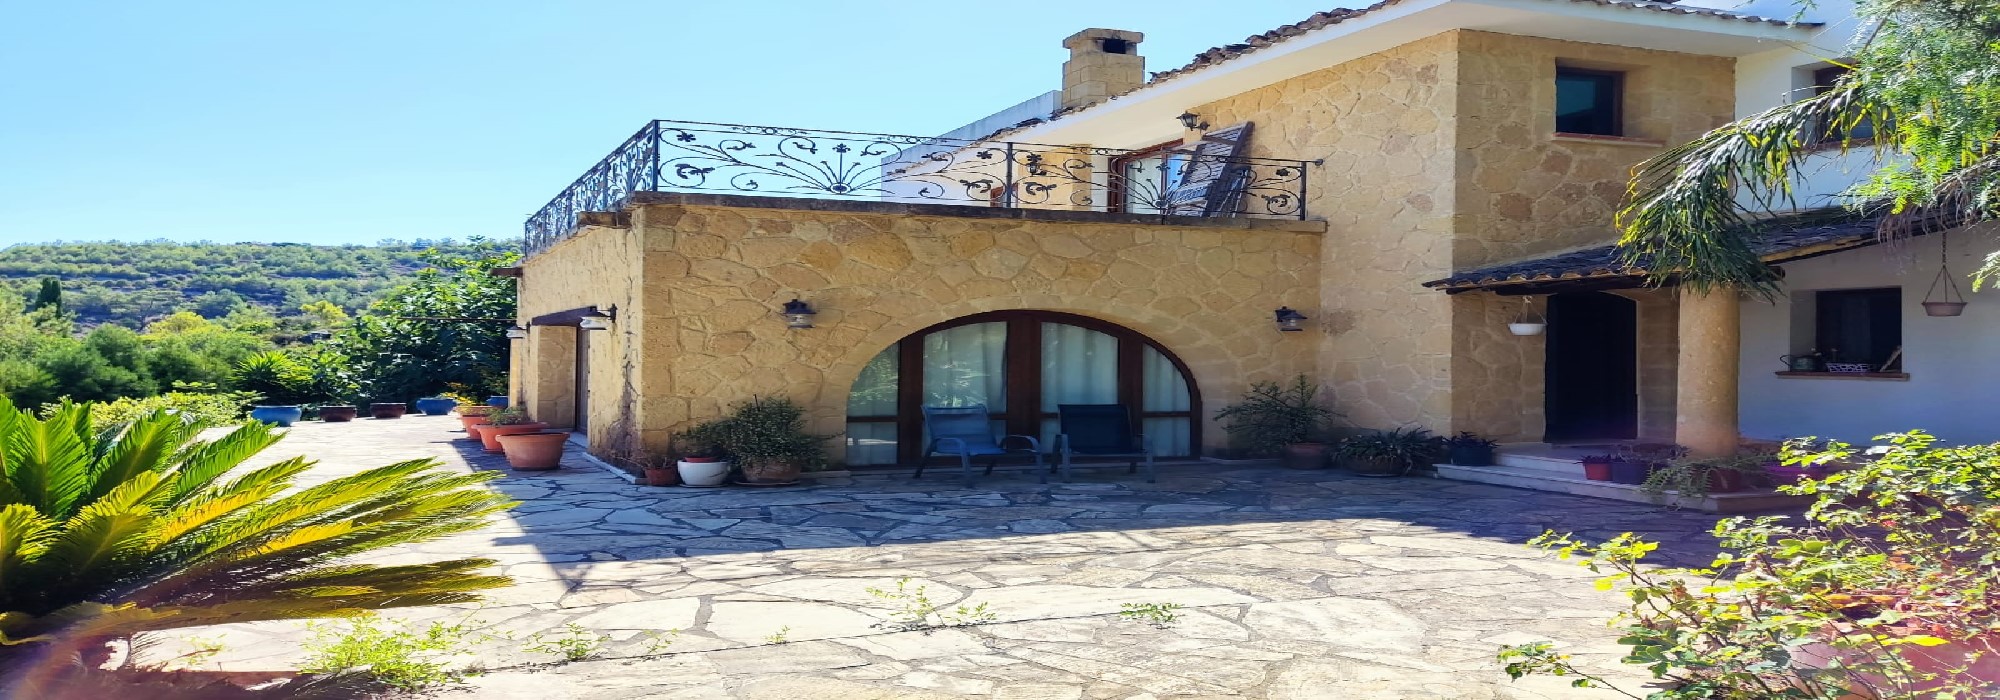 Countryside 3 Bedroom Villa For Sale With Big Piece of Land Location Malataya Alsancak Girne (lots of potential)